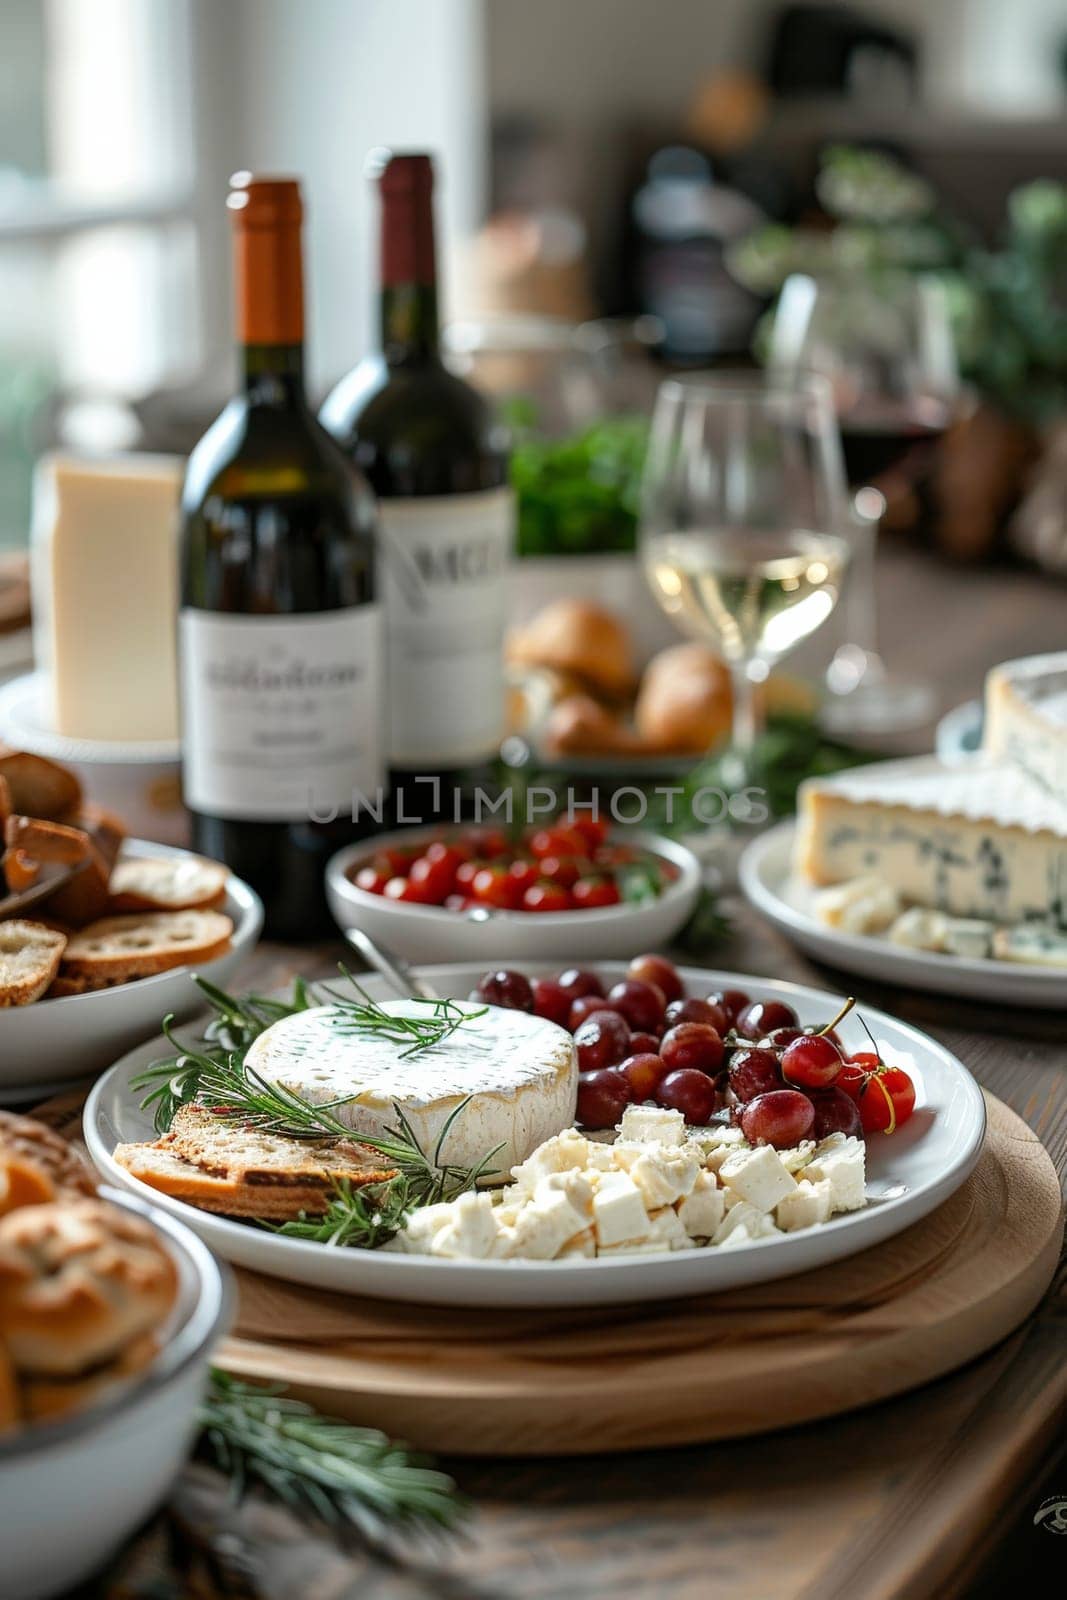 A table with a variety of food and wine, including a white wine bottle with a label that says Michele